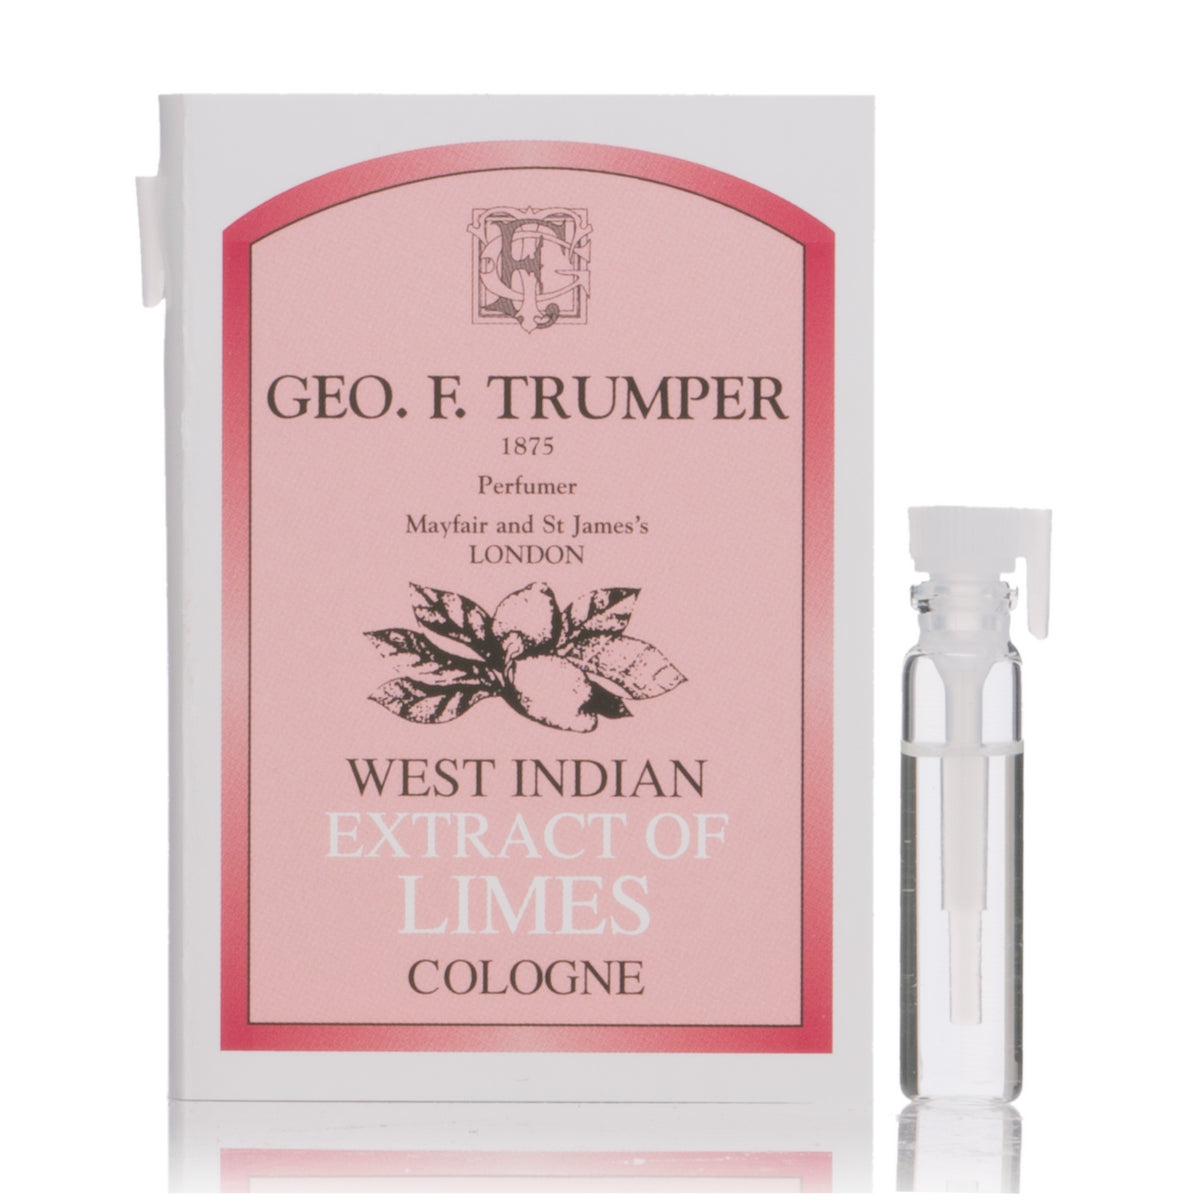  Geo F Trumper Extract of Limes Cologne, 200ml Travel Bottle :  Beauty & Personal Care